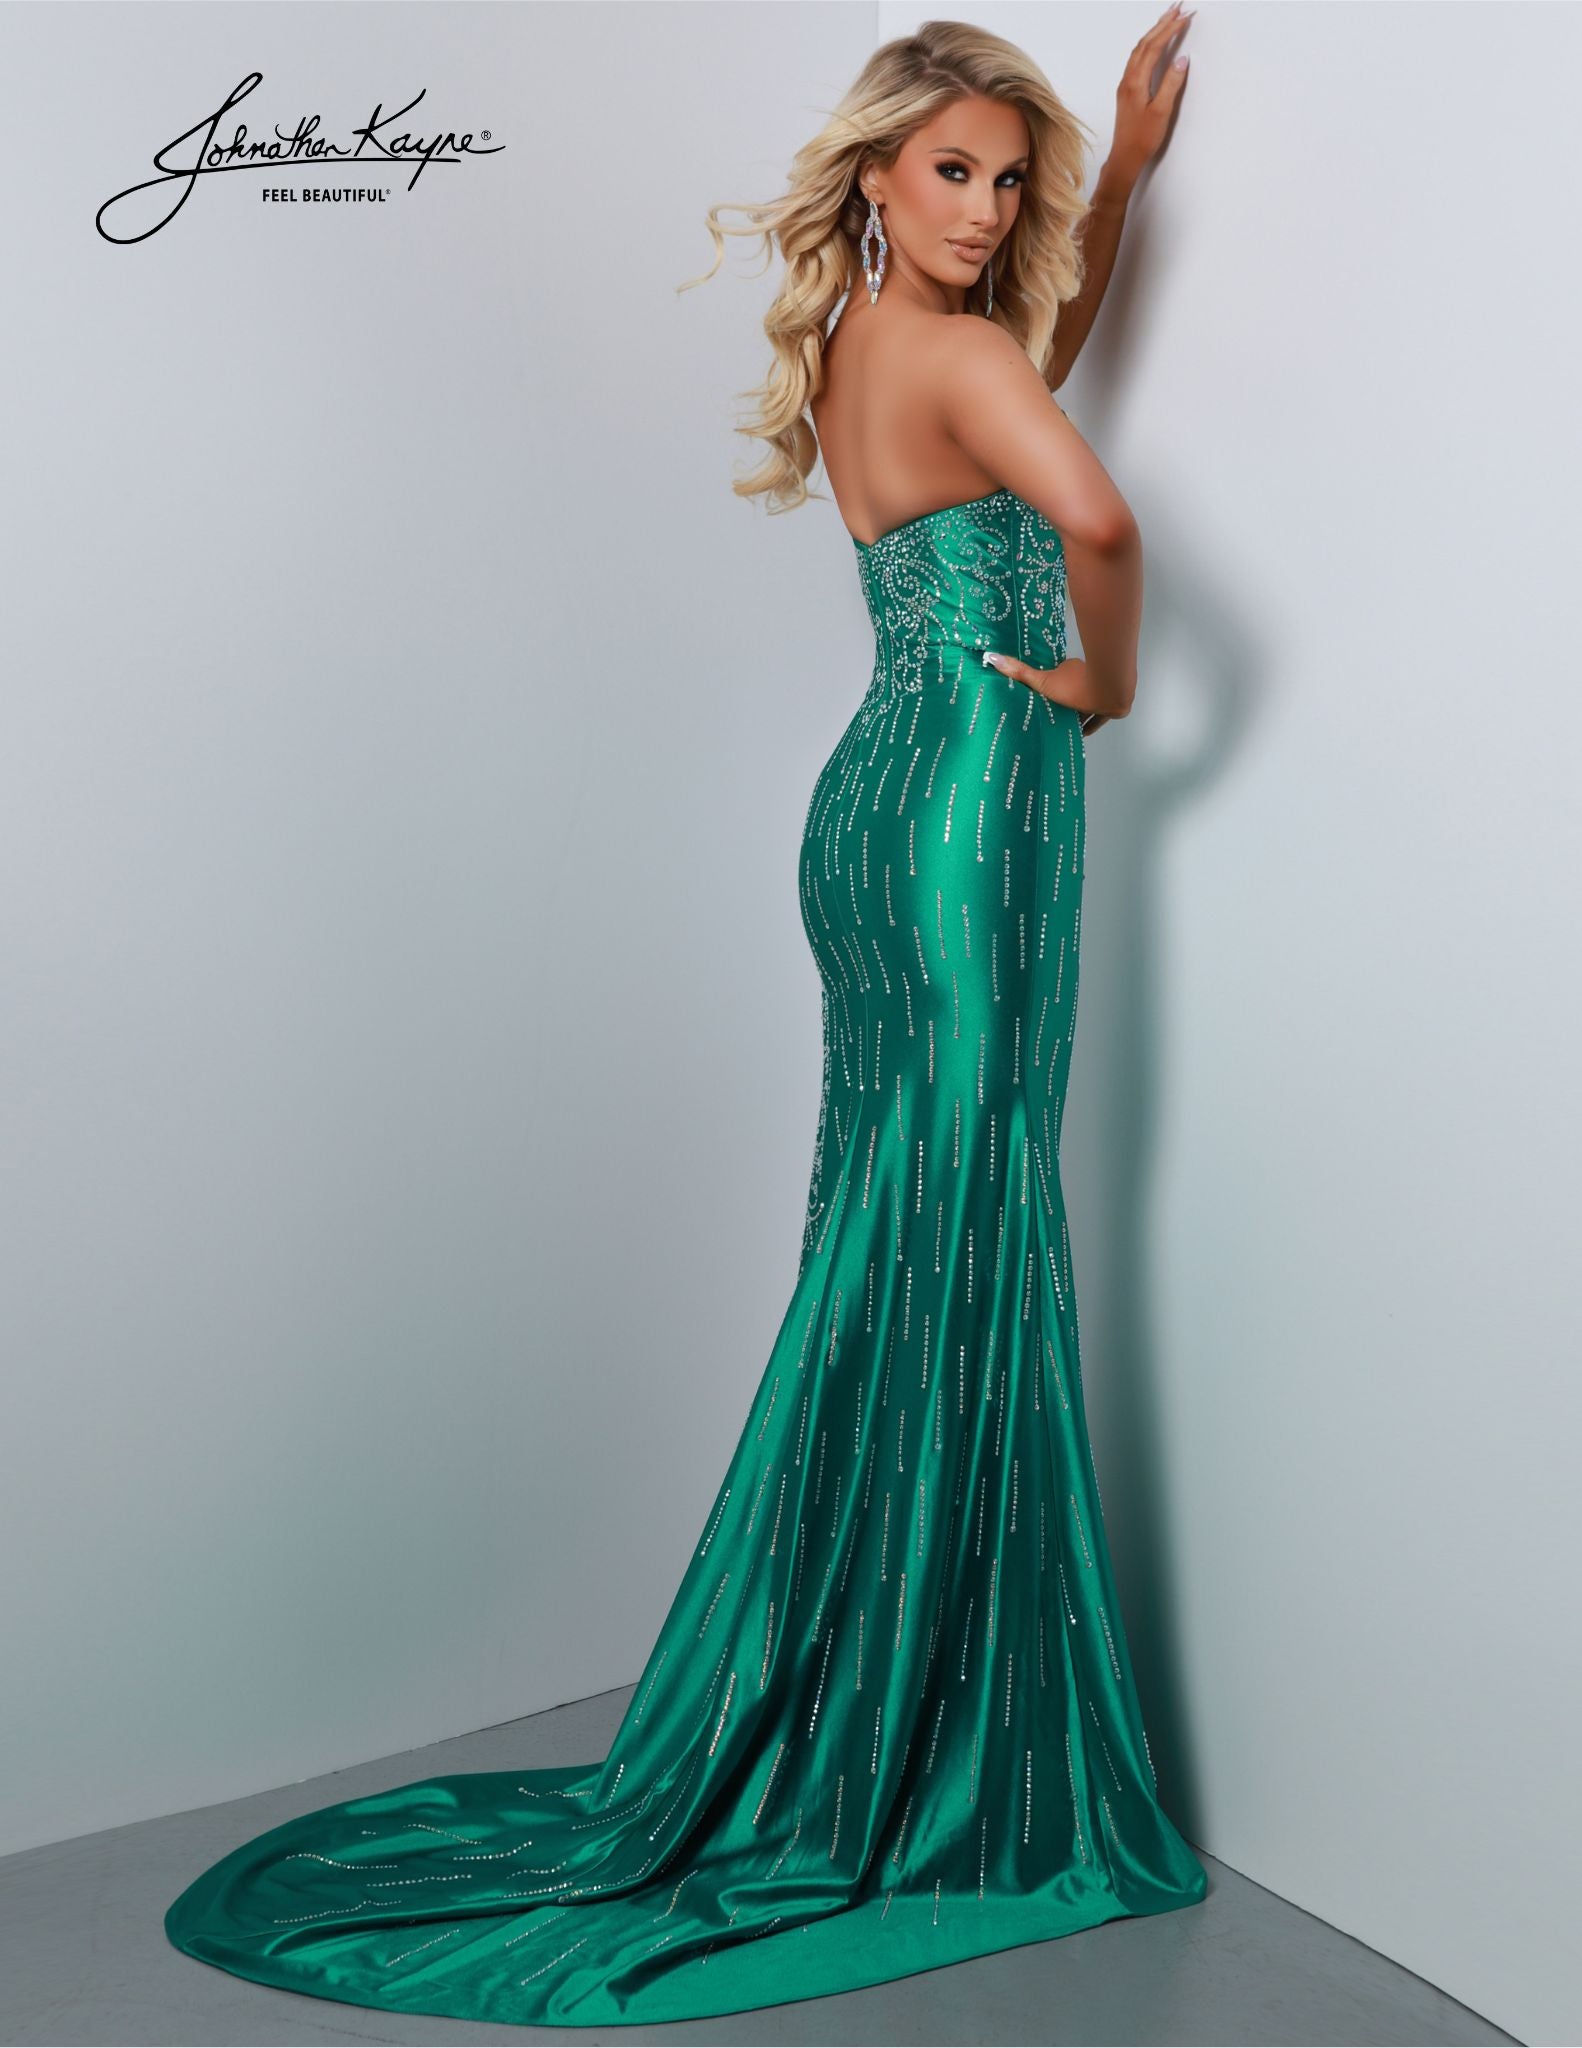 Johnathan Kayne 2875 is the perfect prom dress for any formal occasion. This long gown features a strapless mermaid silhouette with an open back, slit, and sweetheart neckline. The high quality fabric and construction make this dress a fashionable option for any special event. Prom night is all about creating unforgettable memories, and our Shiny 4-Way Stretch Lycra strapless gown with a daring slit is your perfect choice. 